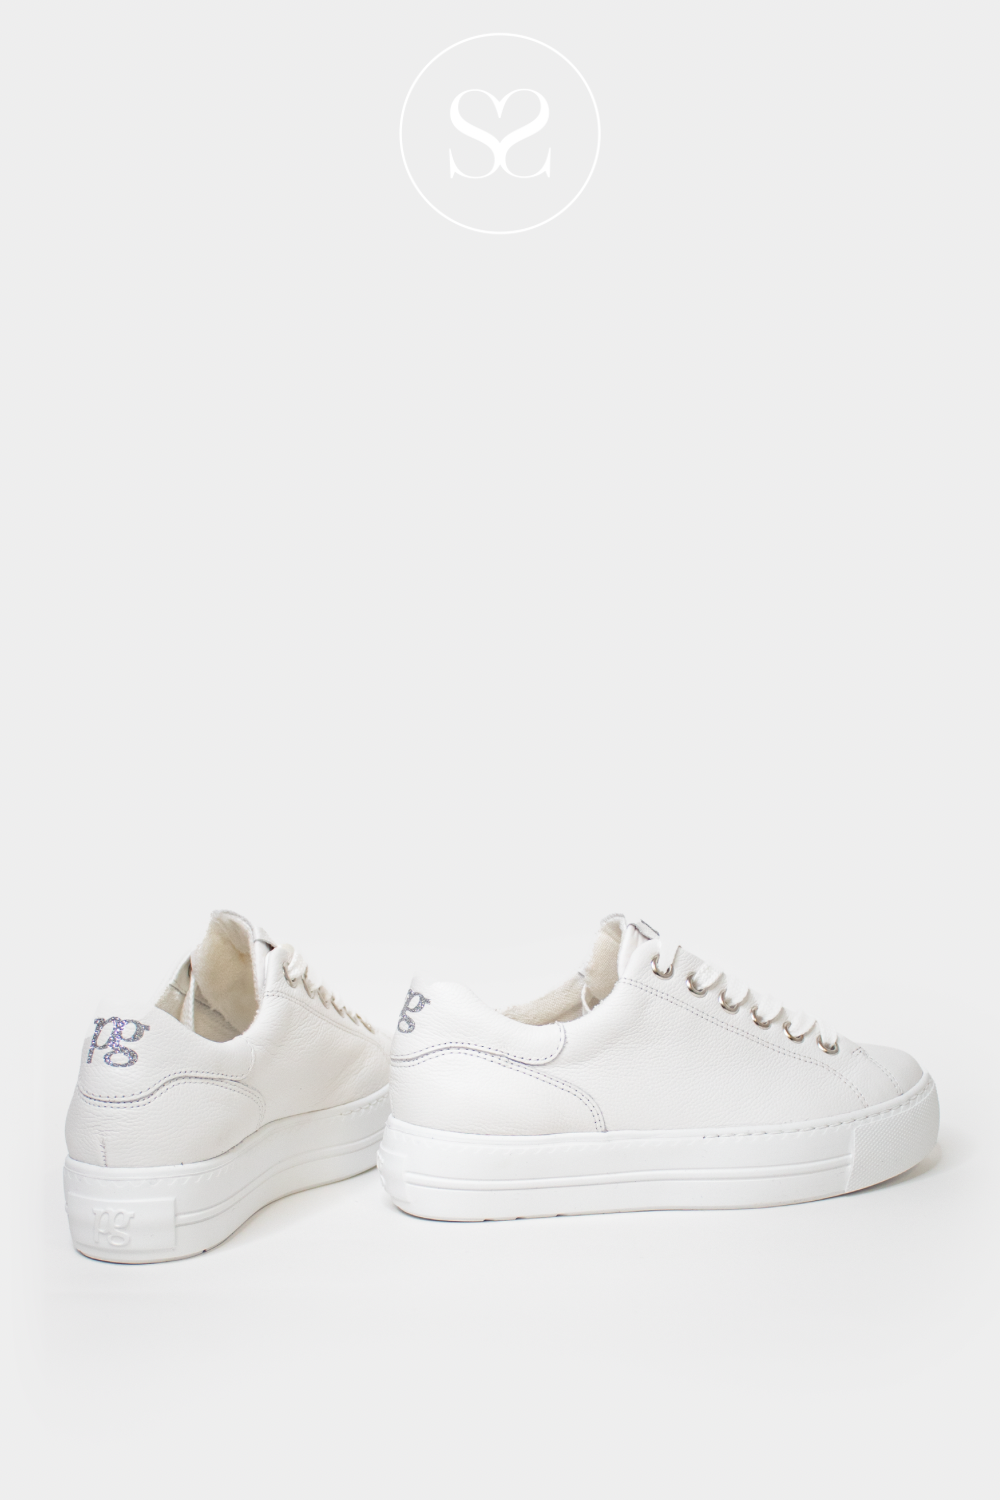 PAUL GREEN 5320 WHITE/SILVER PLATFORM TRAINERS